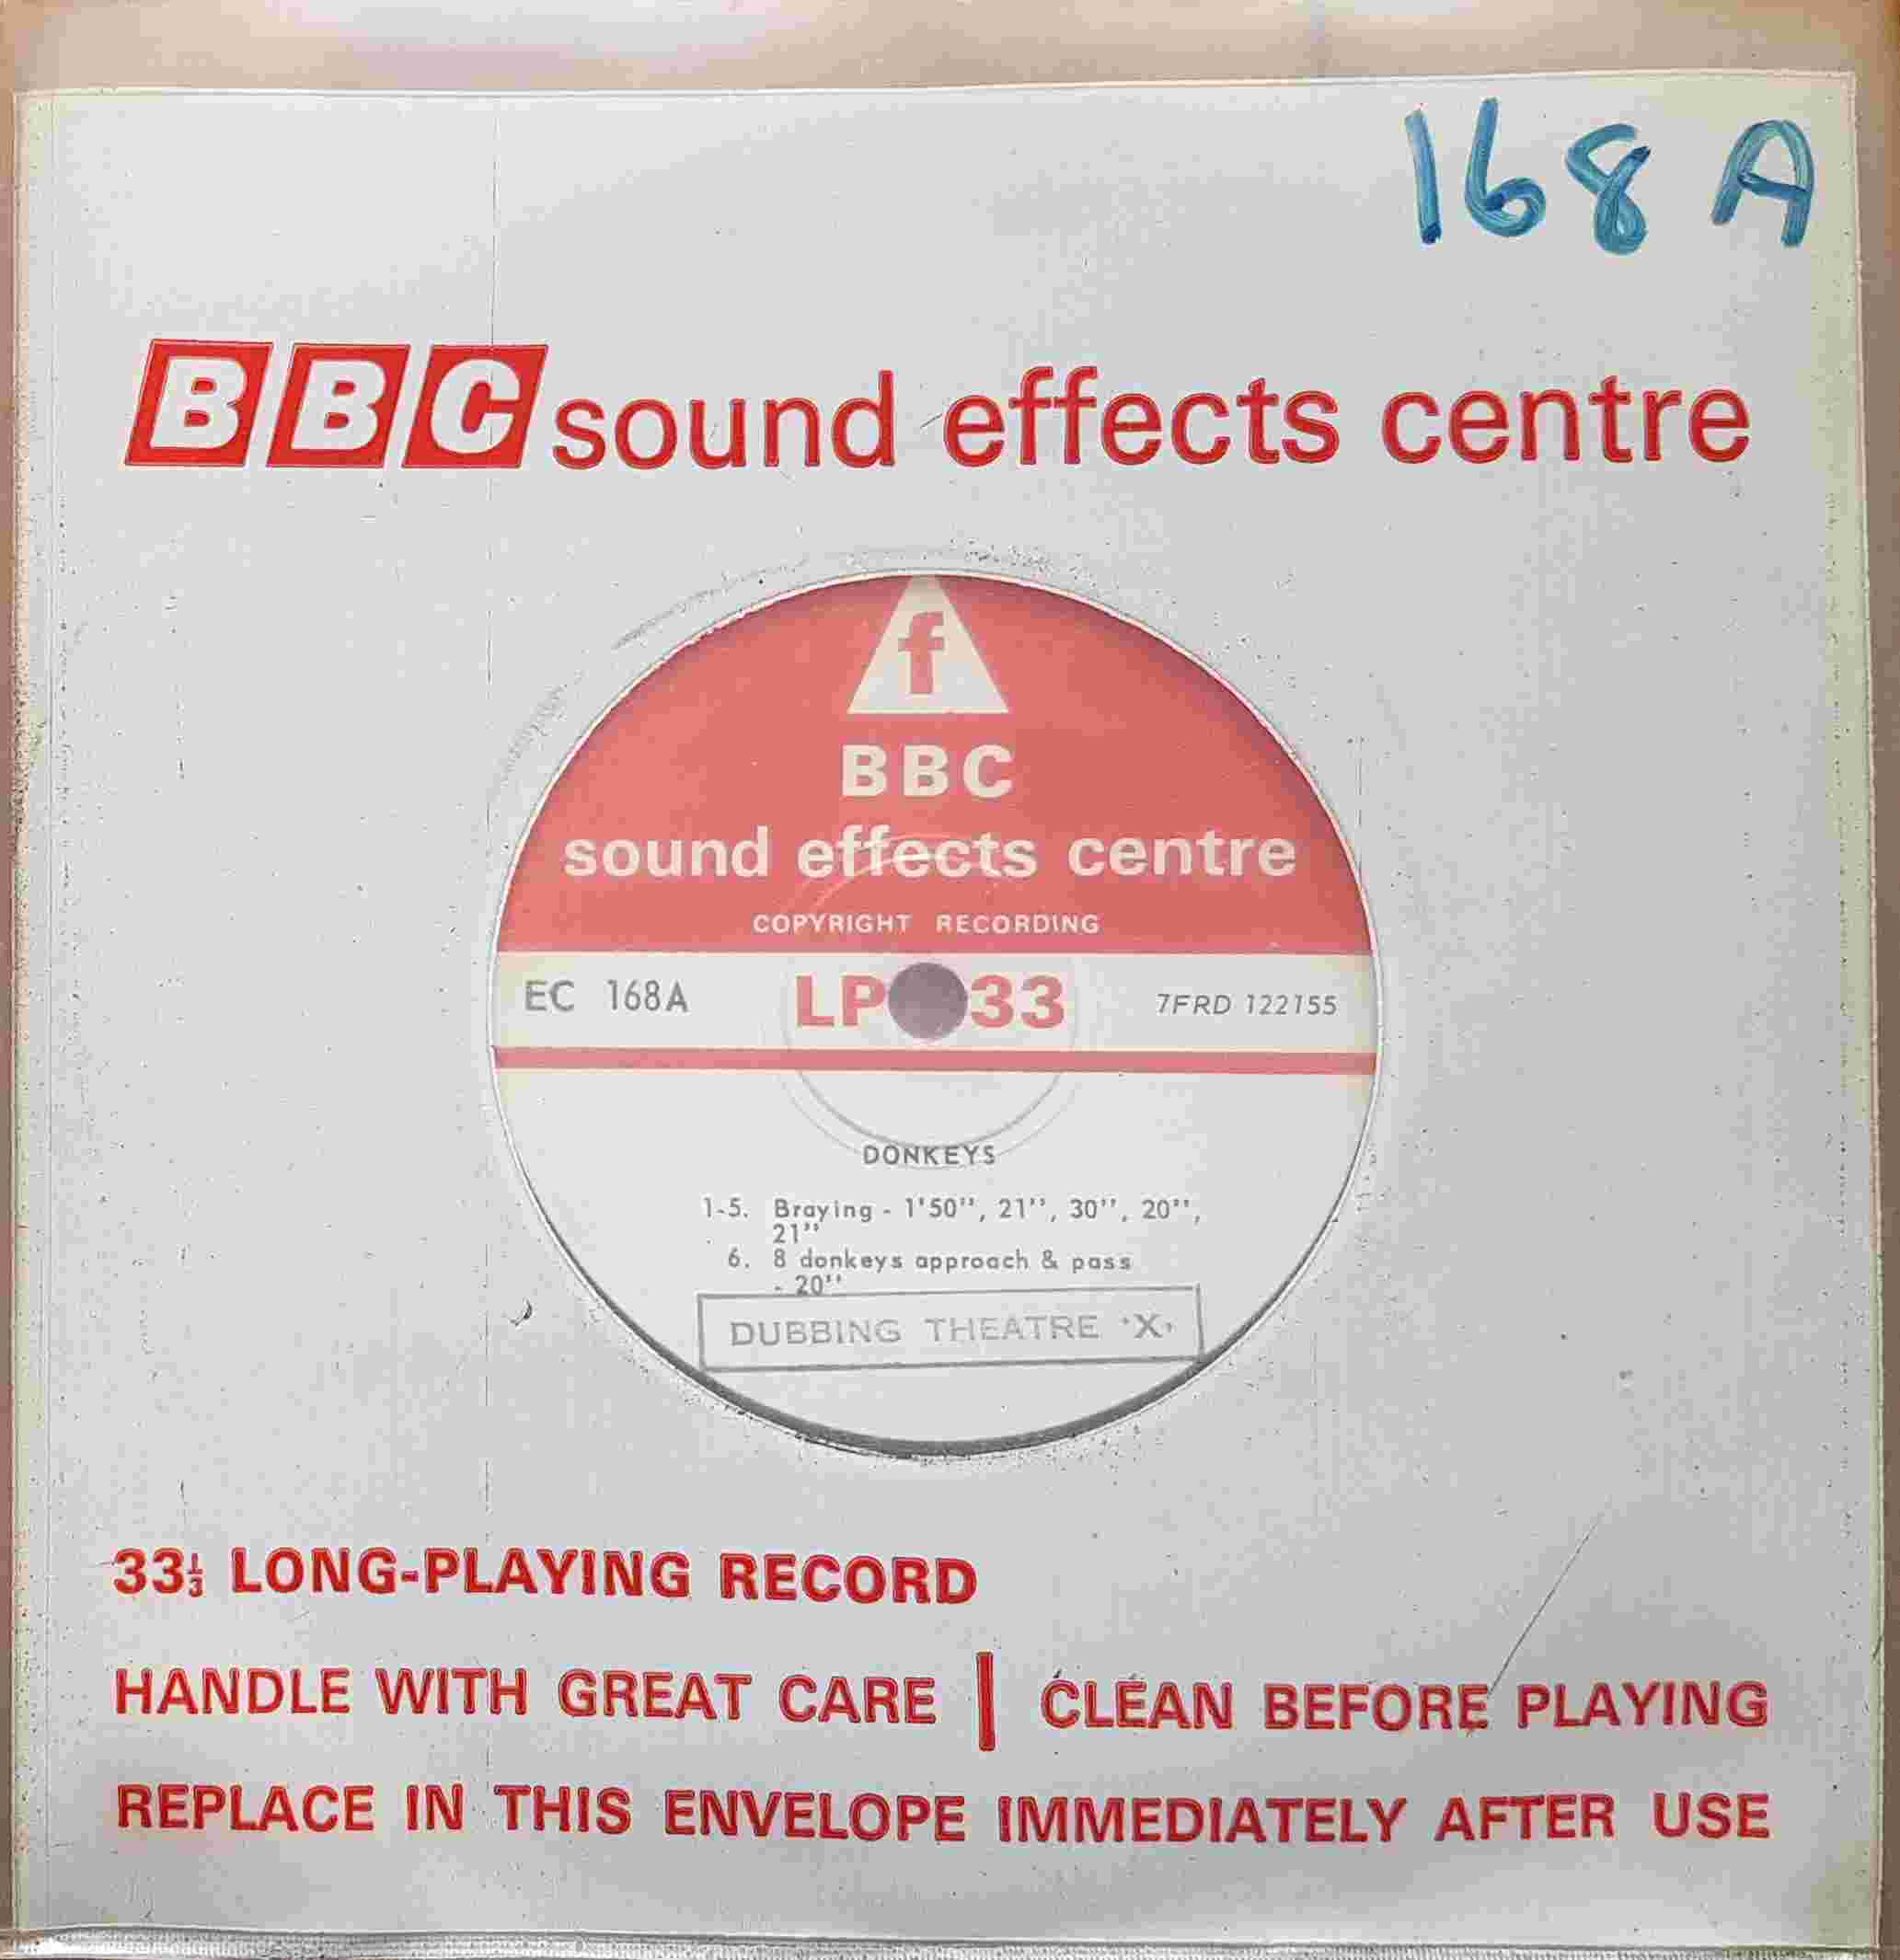 Picture of EC 168A Donkeys by artist Not registered from the BBC singles - Records and Tapes library